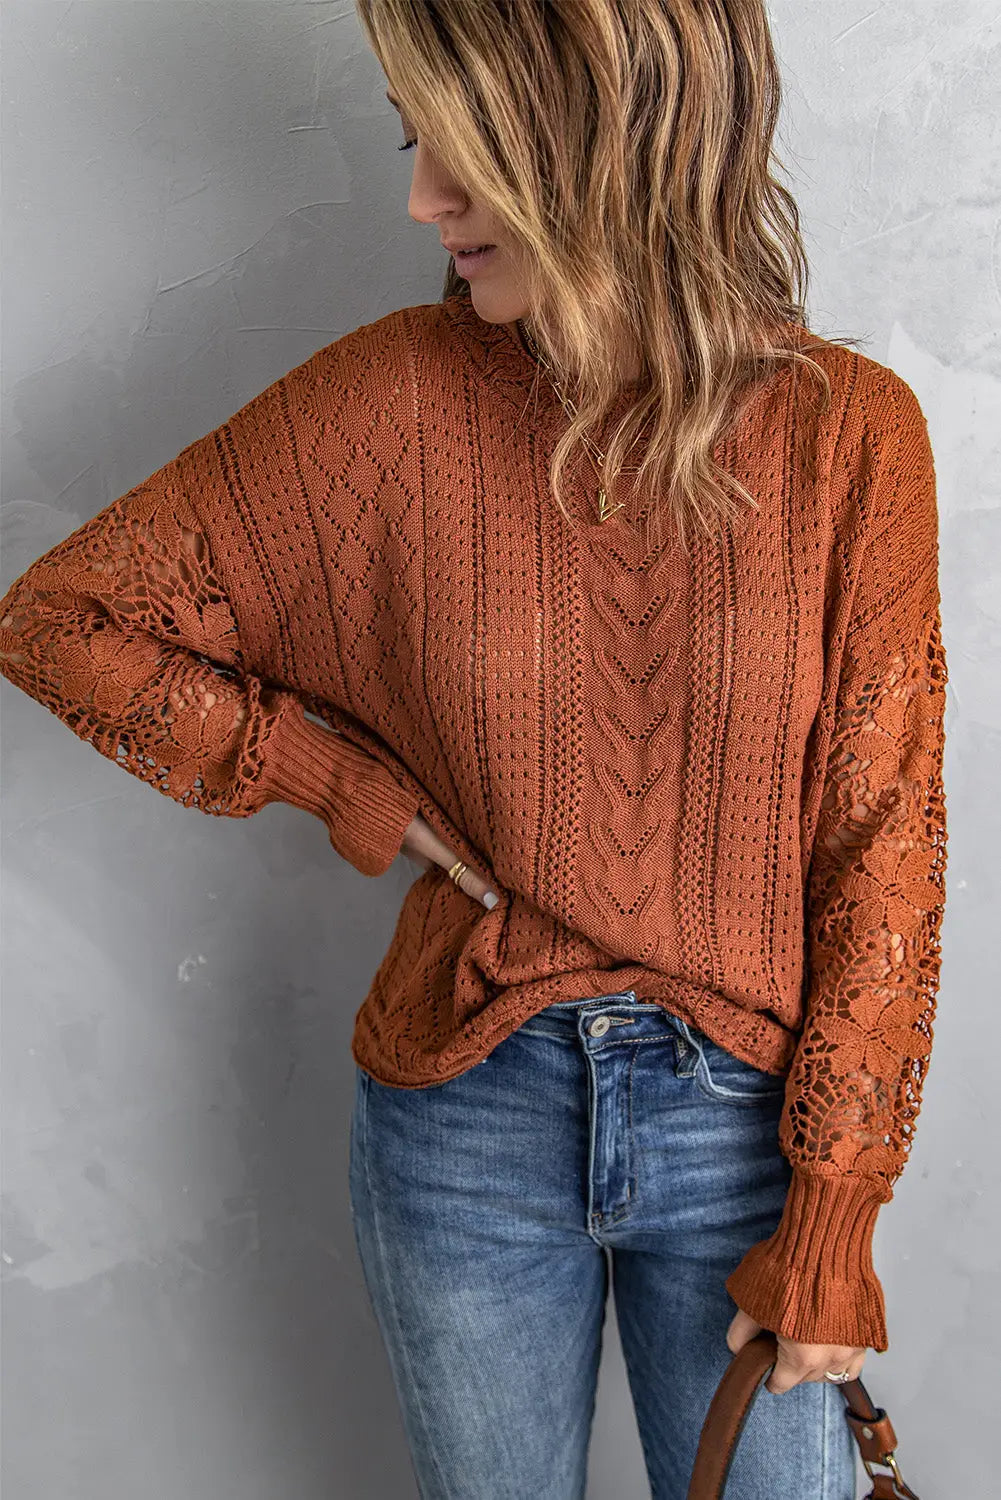 Blue crochet lace pointelle knit sweater - brown / s / 55% acrylic + 45% cotton - sweaters & cardigans